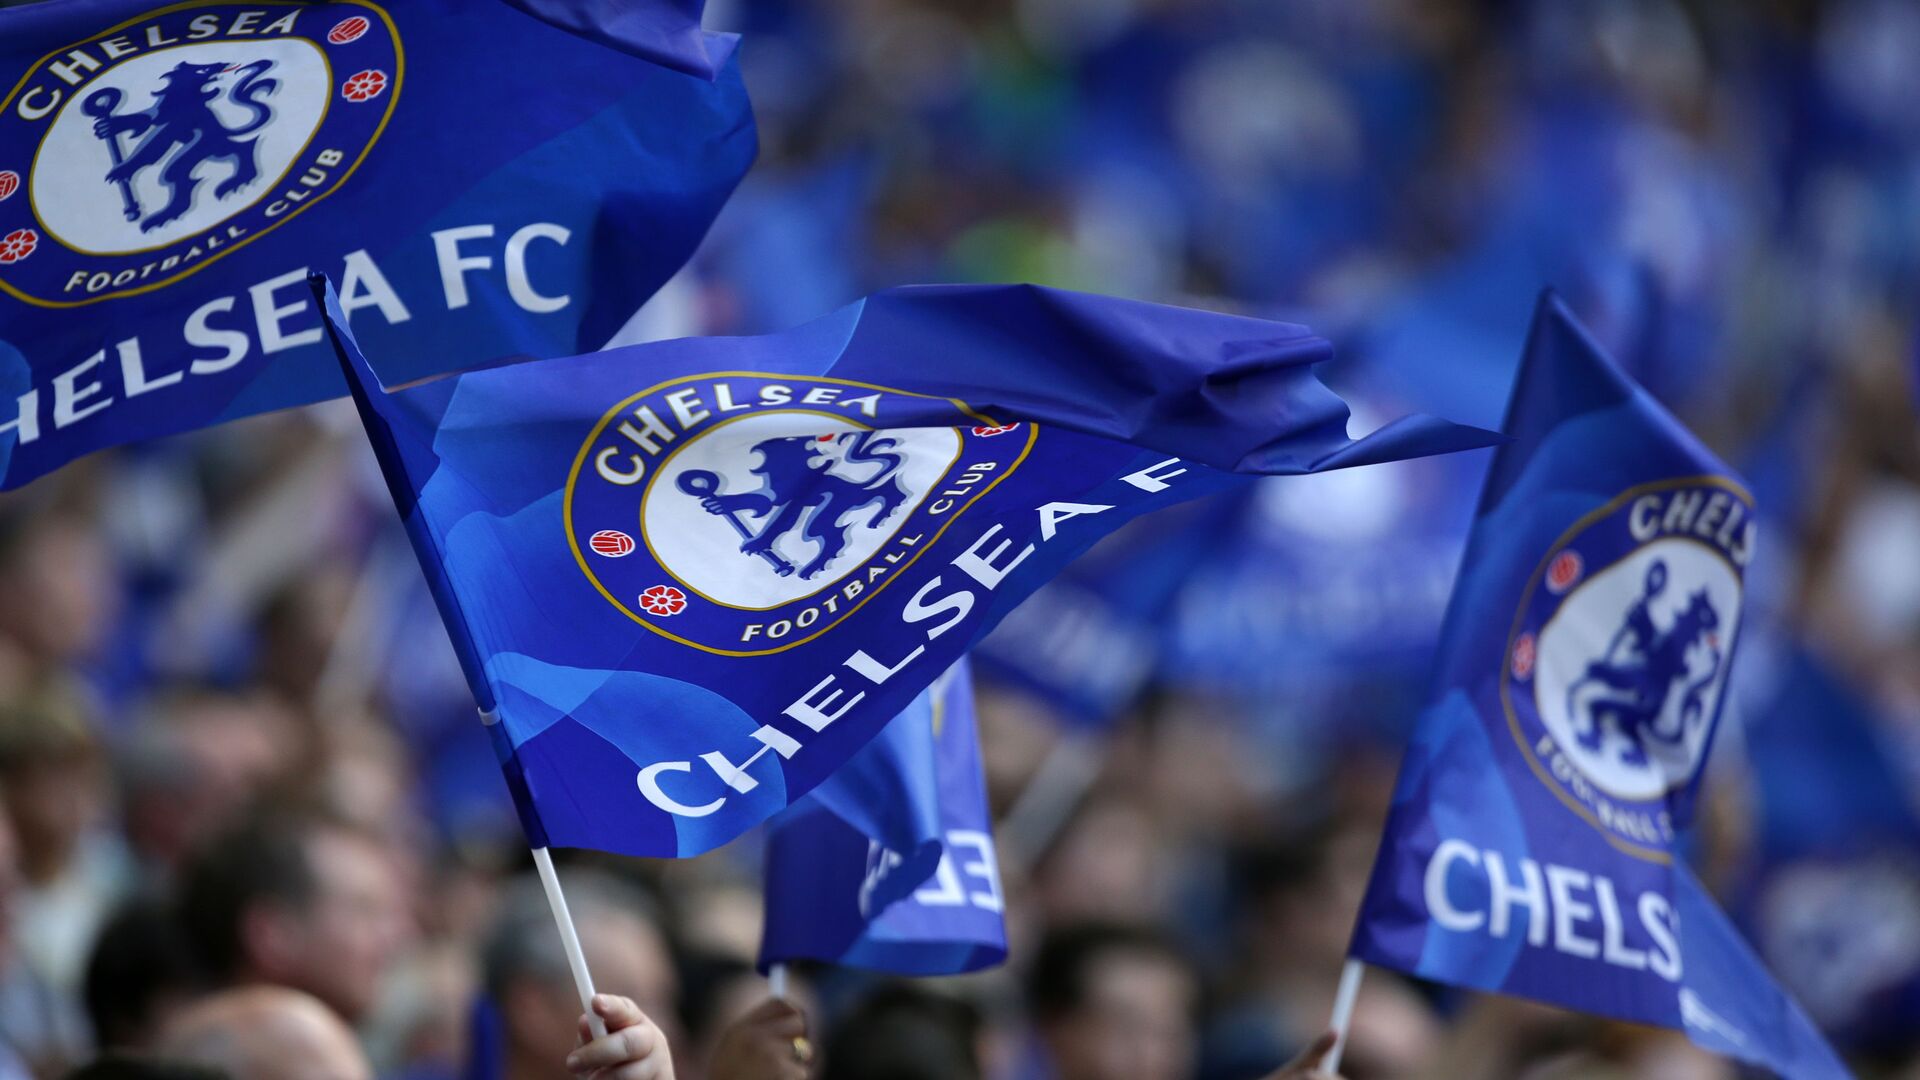 Cheslea supporters wave flags in the crowd ahead of the English FA Community Shield football match between Arsenal and Chelsea at Wembley Stadium - اسپوتنیک افغانستان  , 1920, 03.08.2022